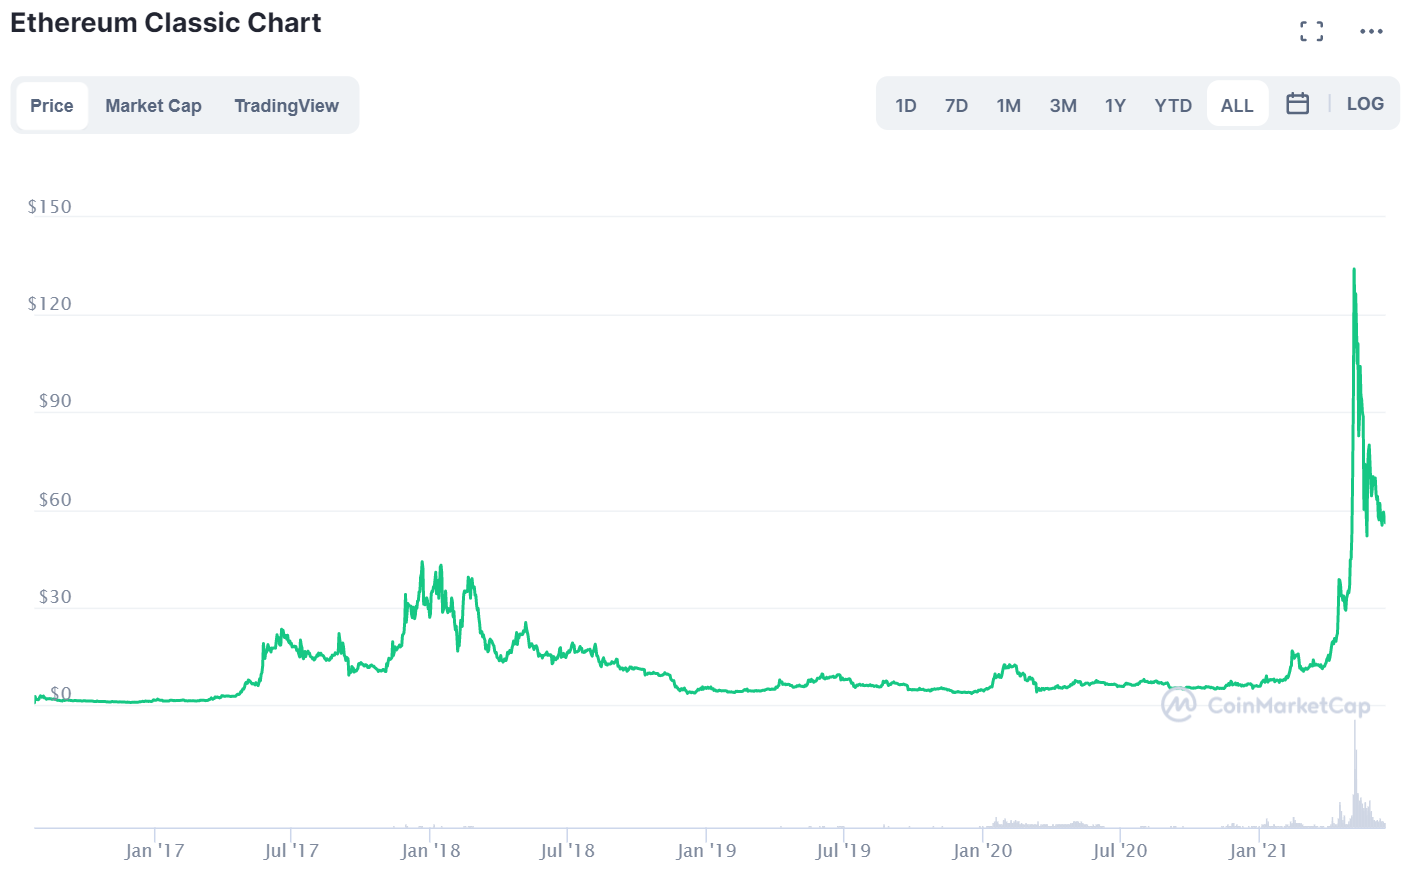 Ethereum Classic Price Prediction 2021 and Beyond - Is ETC a Good Investment?